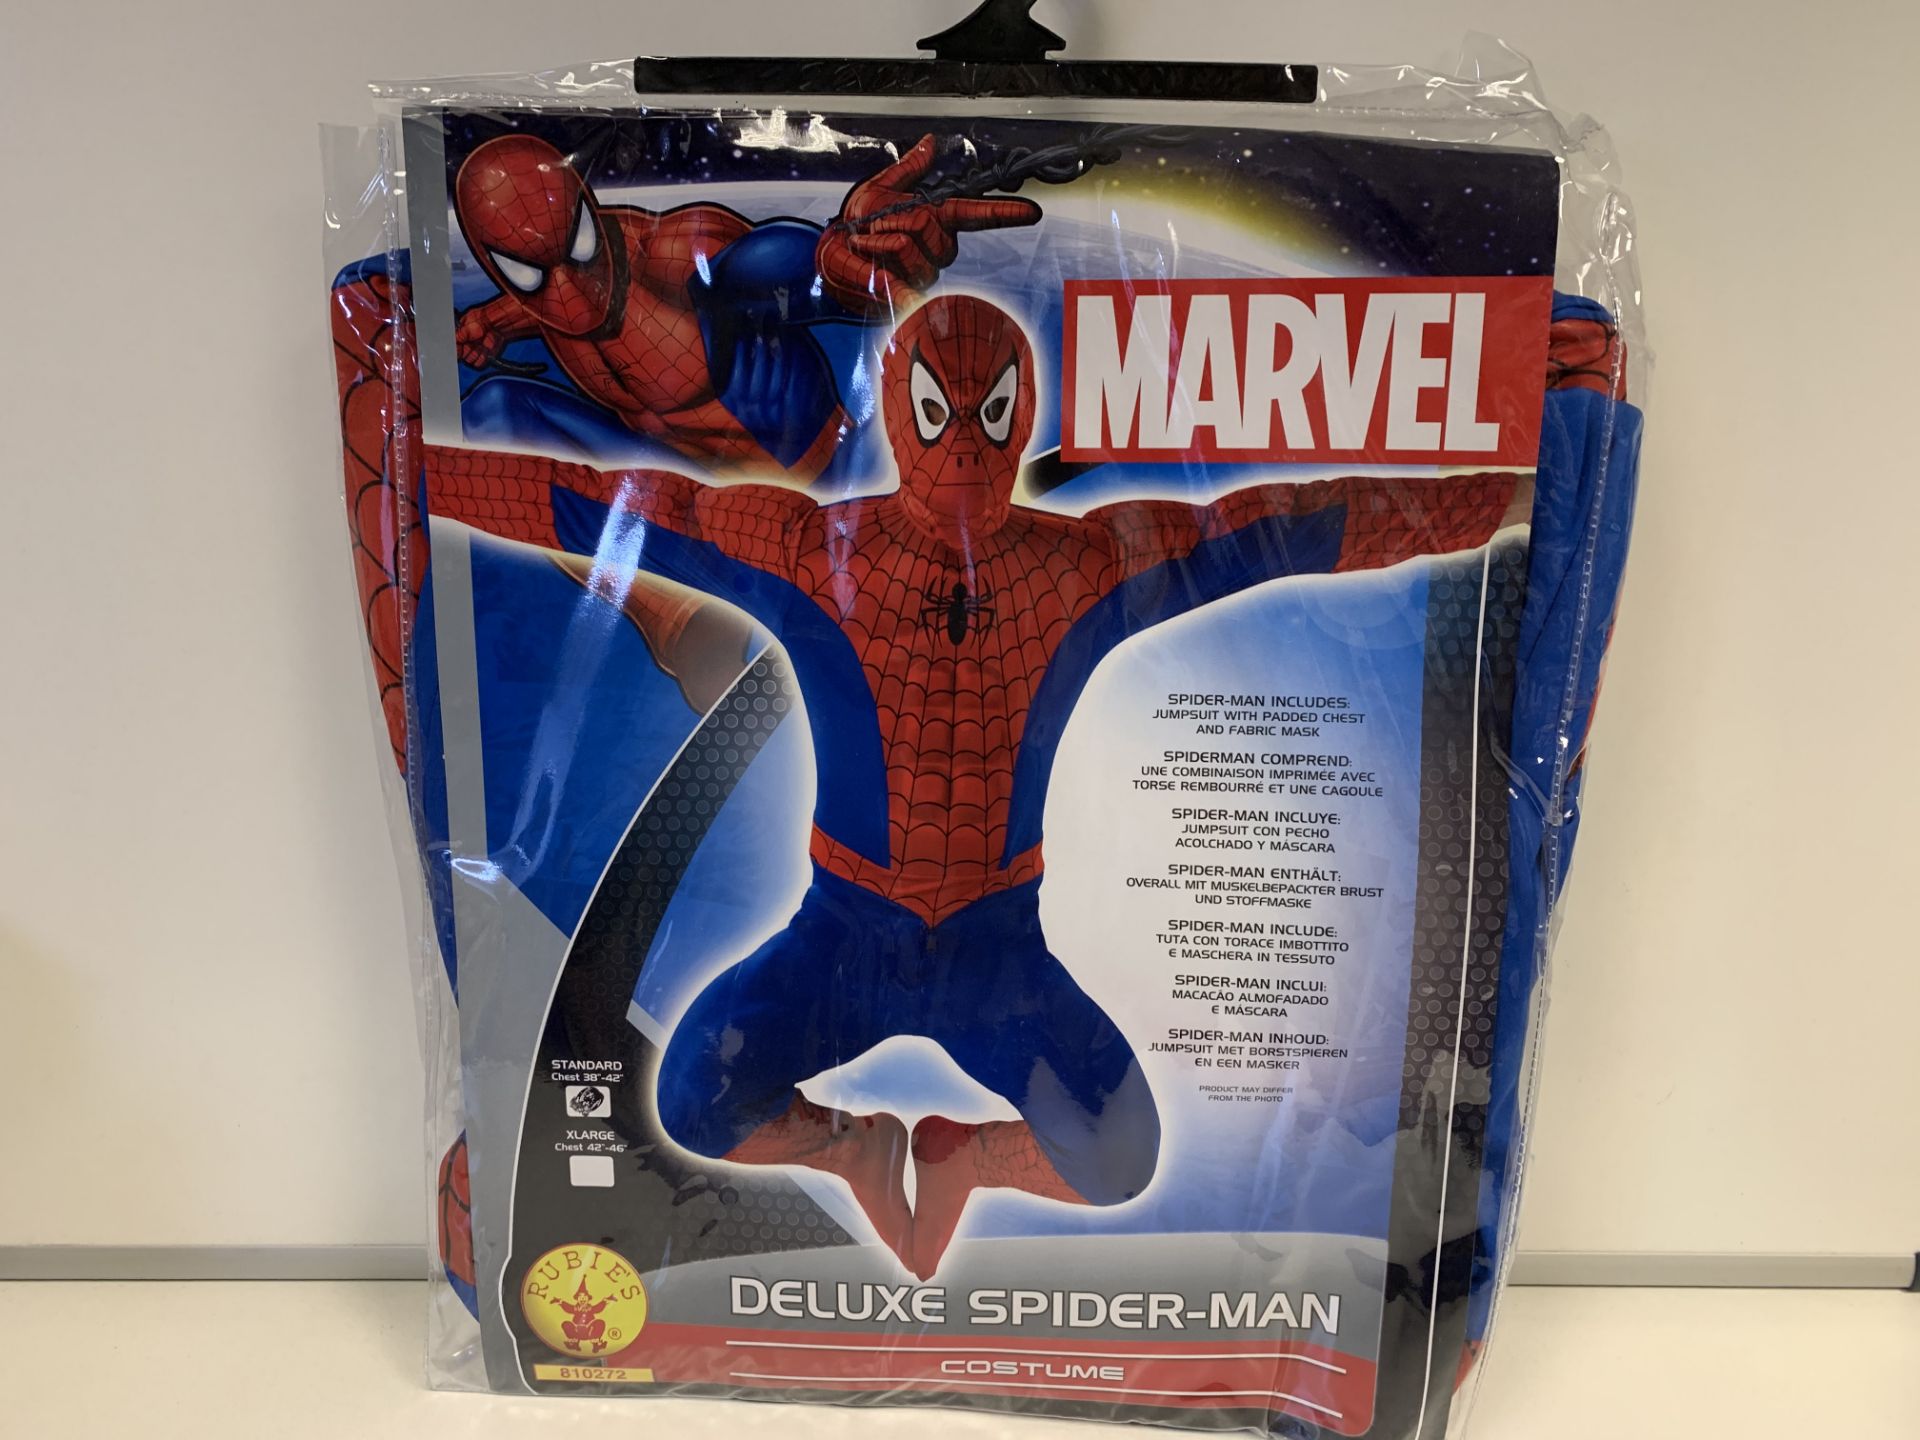 20 X BRAND NEW RUBIES MARVEL SPIDERMAN COSTUMES SIZE XL IN 1 BOX